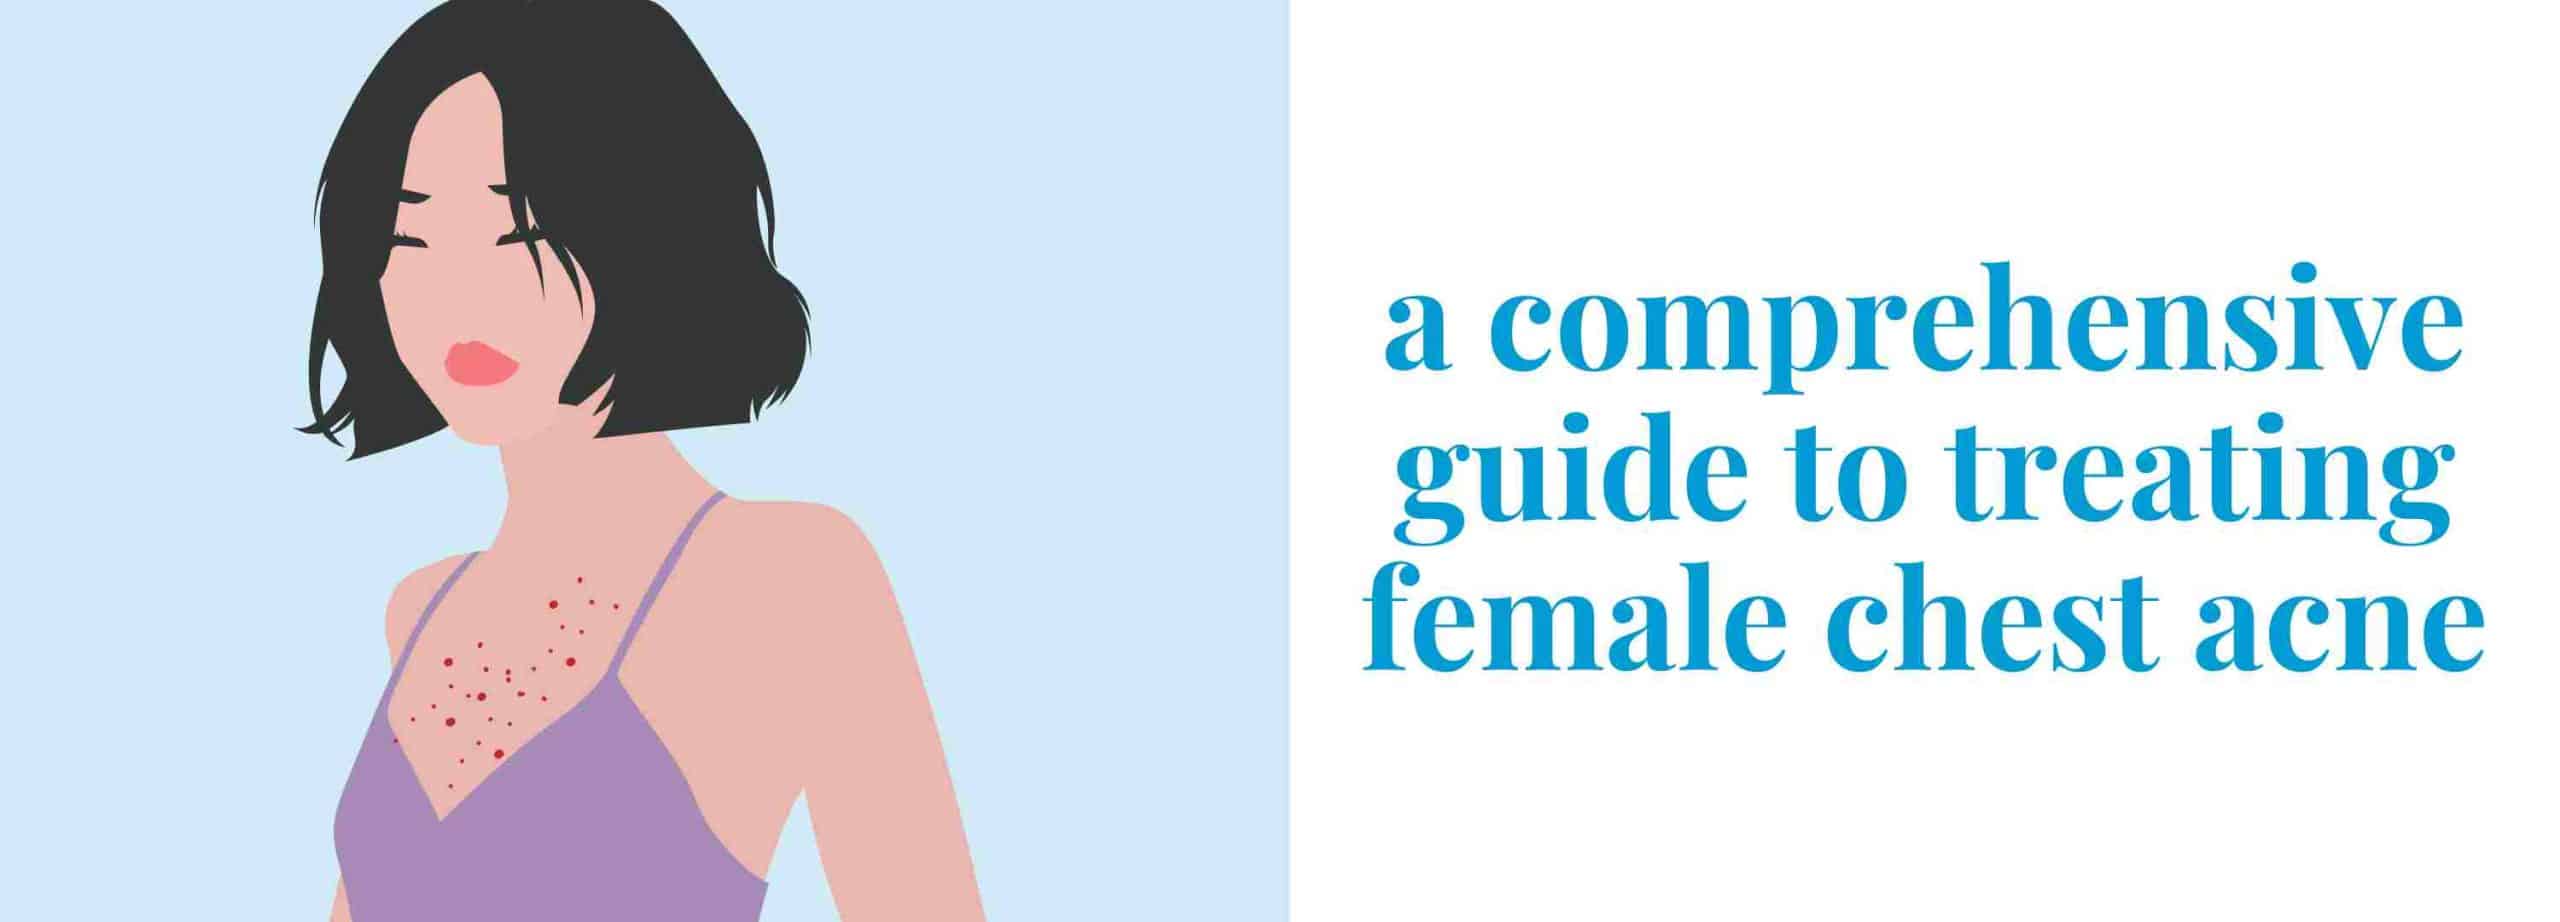 a comprehensive guide to treating female chest acne